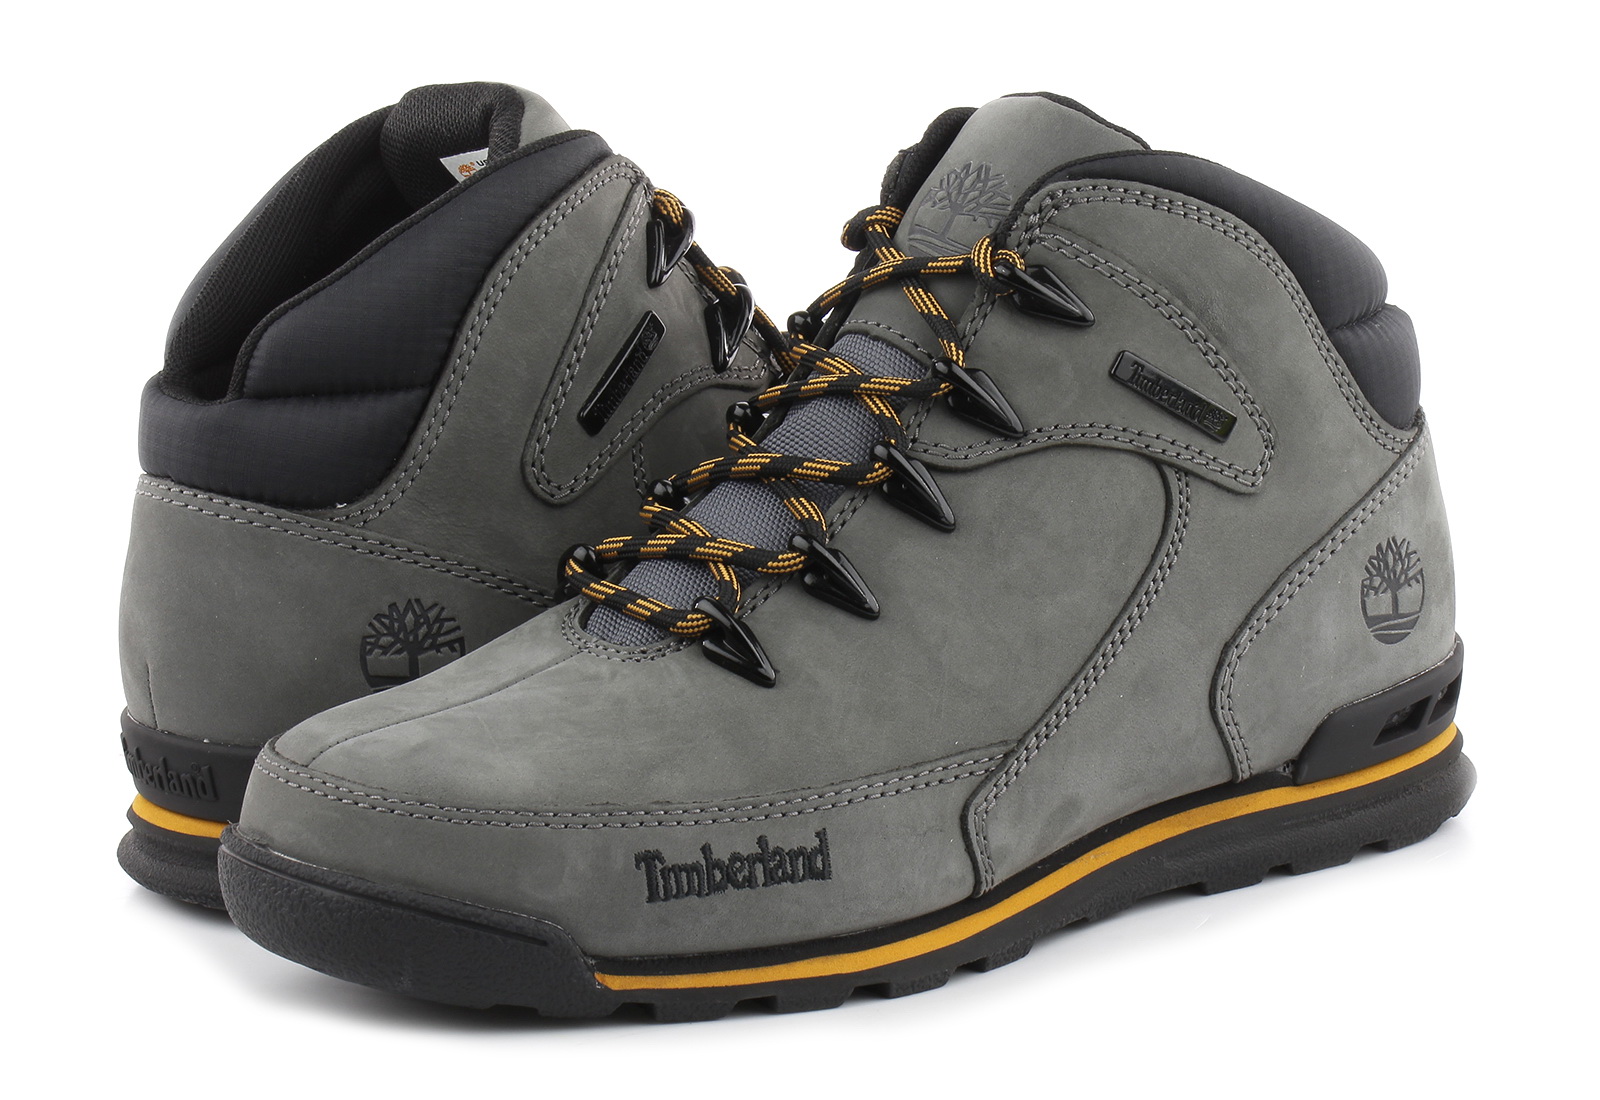 Independently wheel Compare Timberland Bocanci hikers - Euro Rock - A2JDG-GRY - Office Shoes Romania